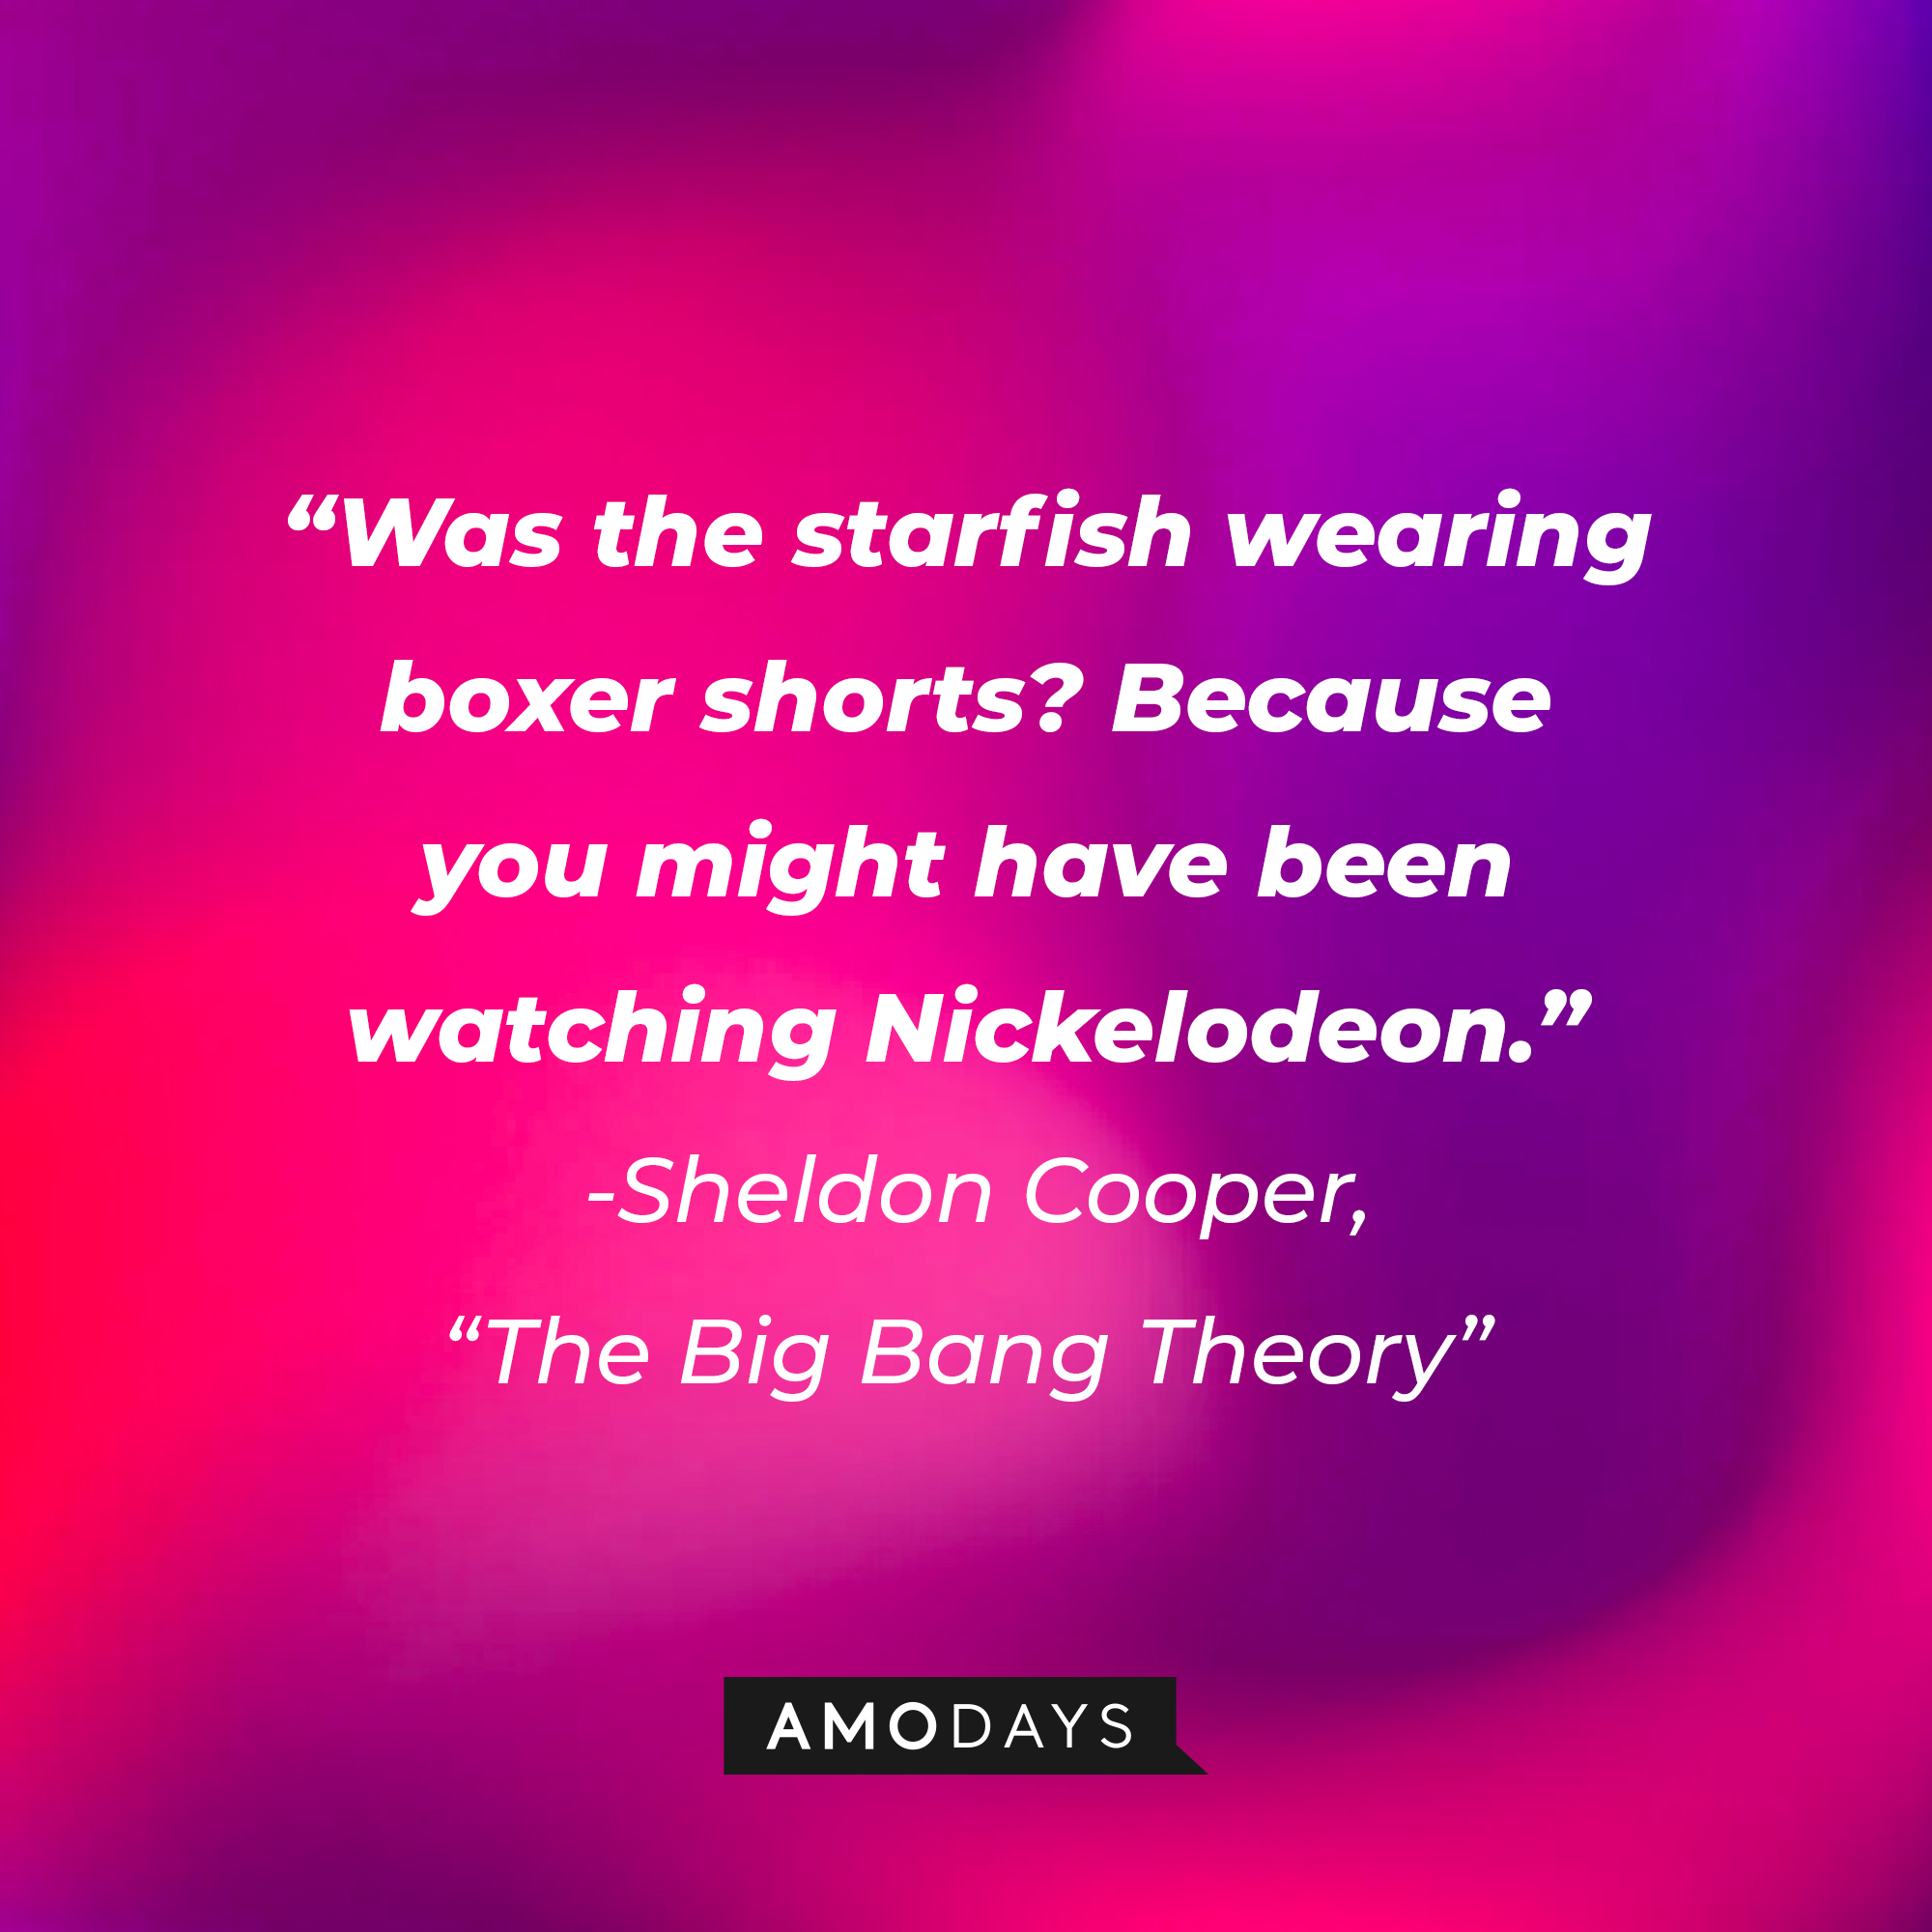 Sheldon Cooper's quote from "The Big Bang Theory": "Was the starfish wearing boxer shorts? Because you might have been watching Nickelodeon." | Source: Amodays